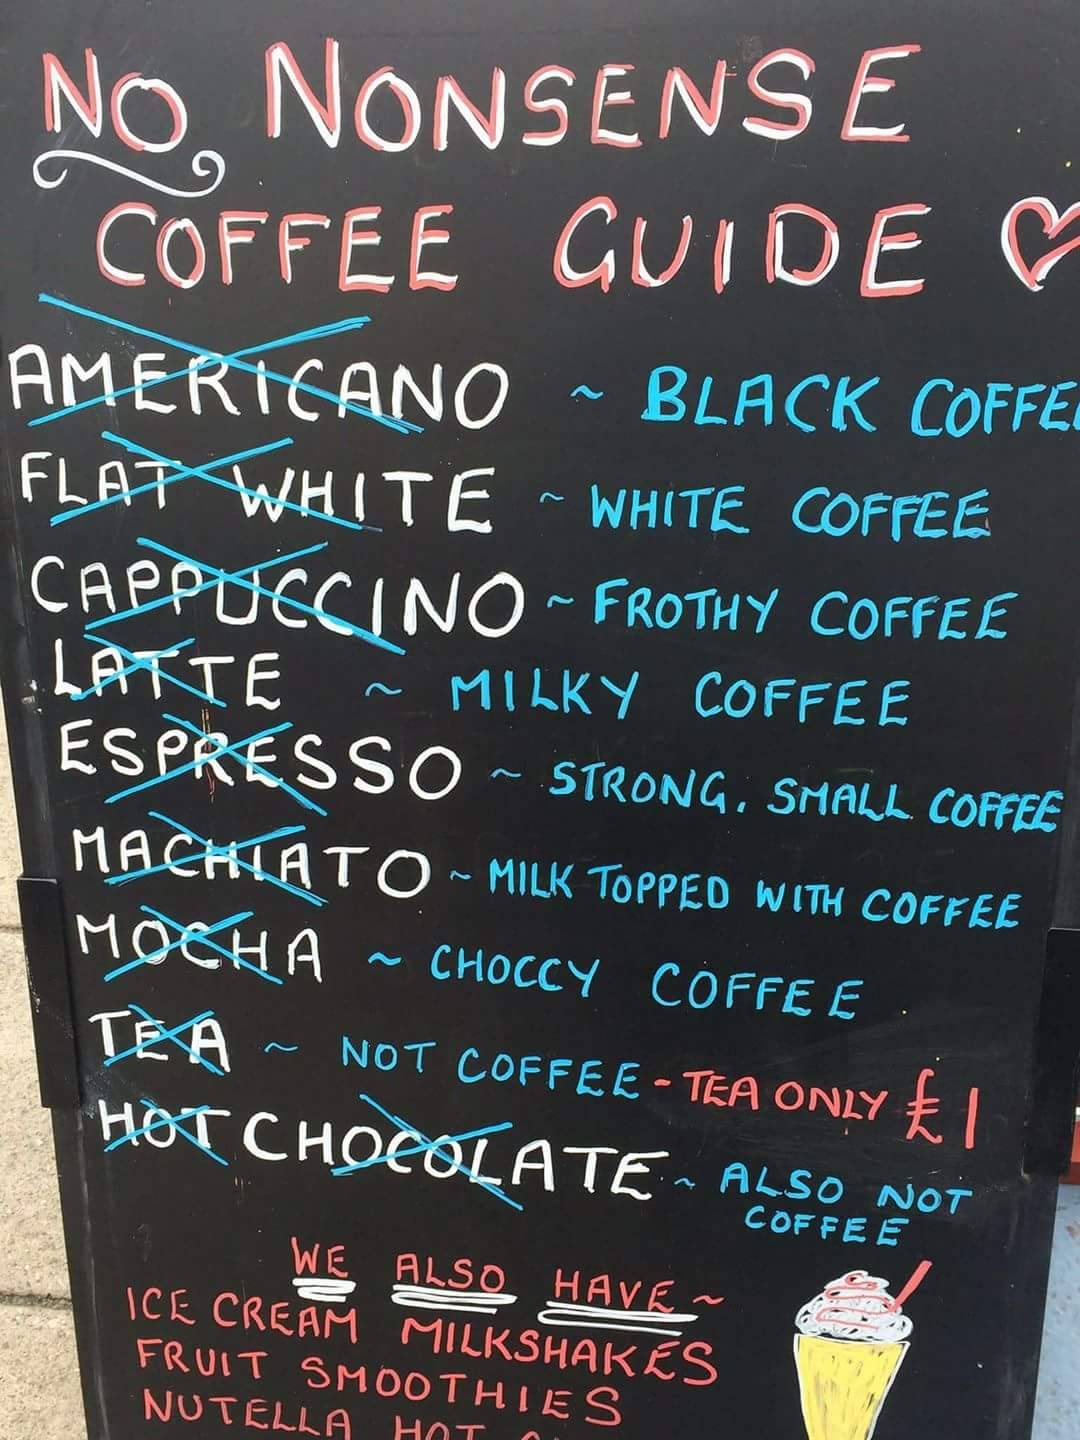 funny picture of a non nonsense guide to coffee on a chalkboard 